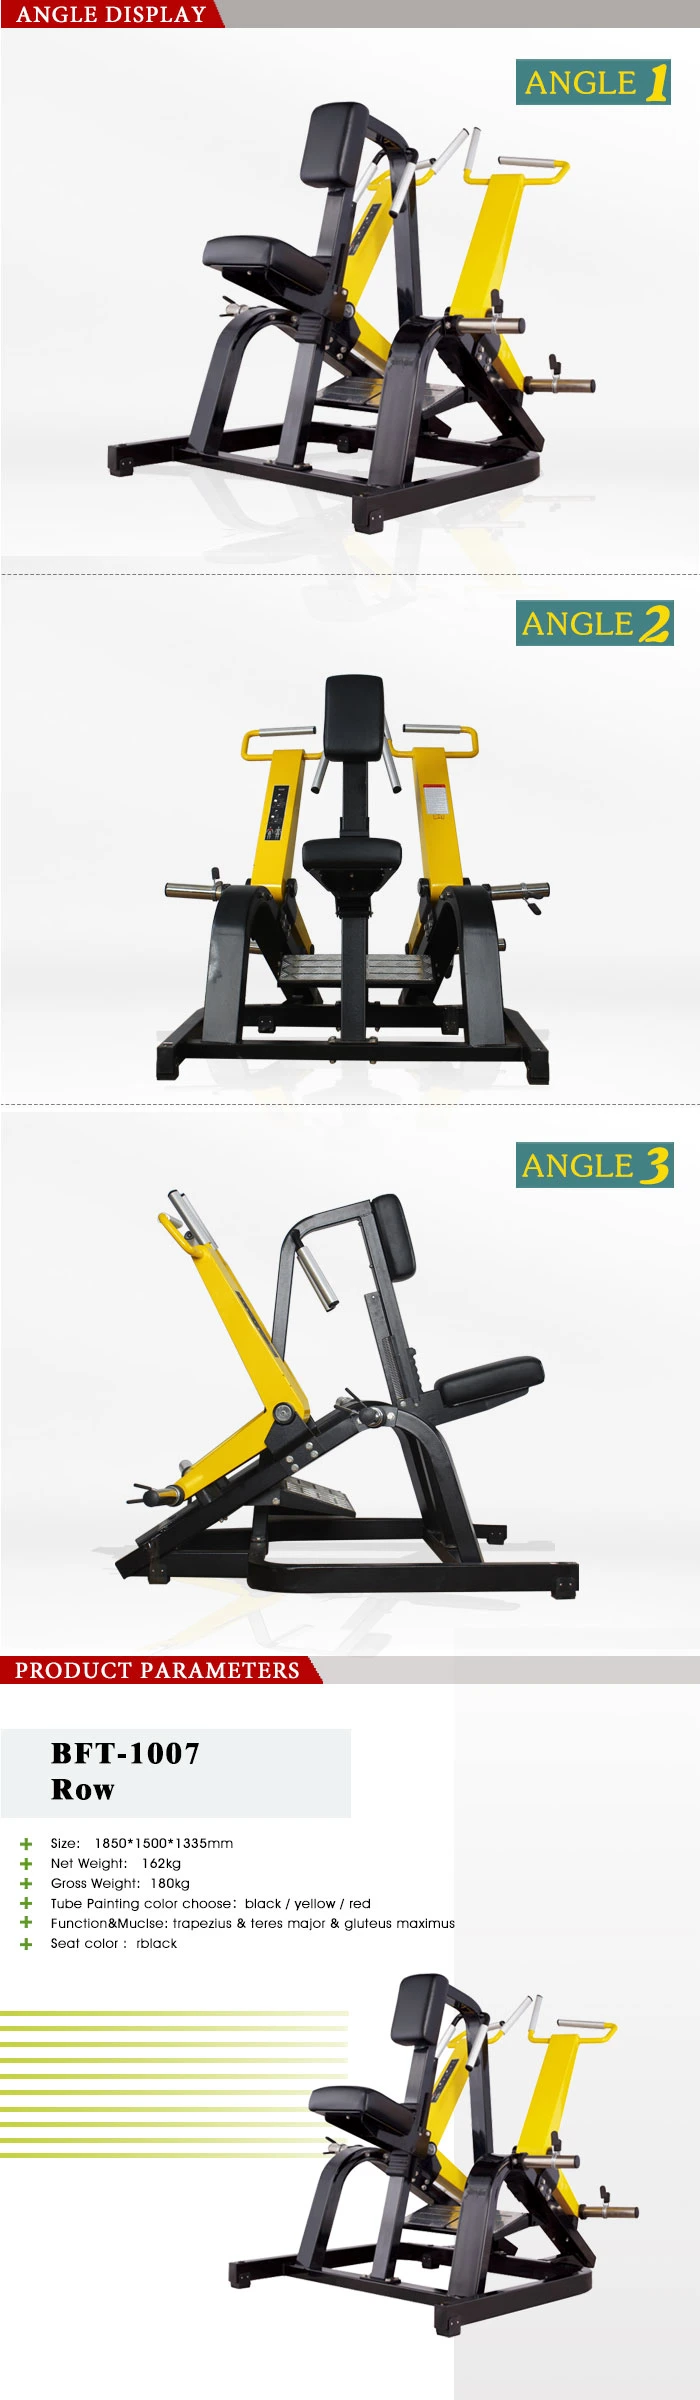 High Quality Muscle Strength Equipment, Lat Pulldown/Seated Row, Vertical Rowing Machine